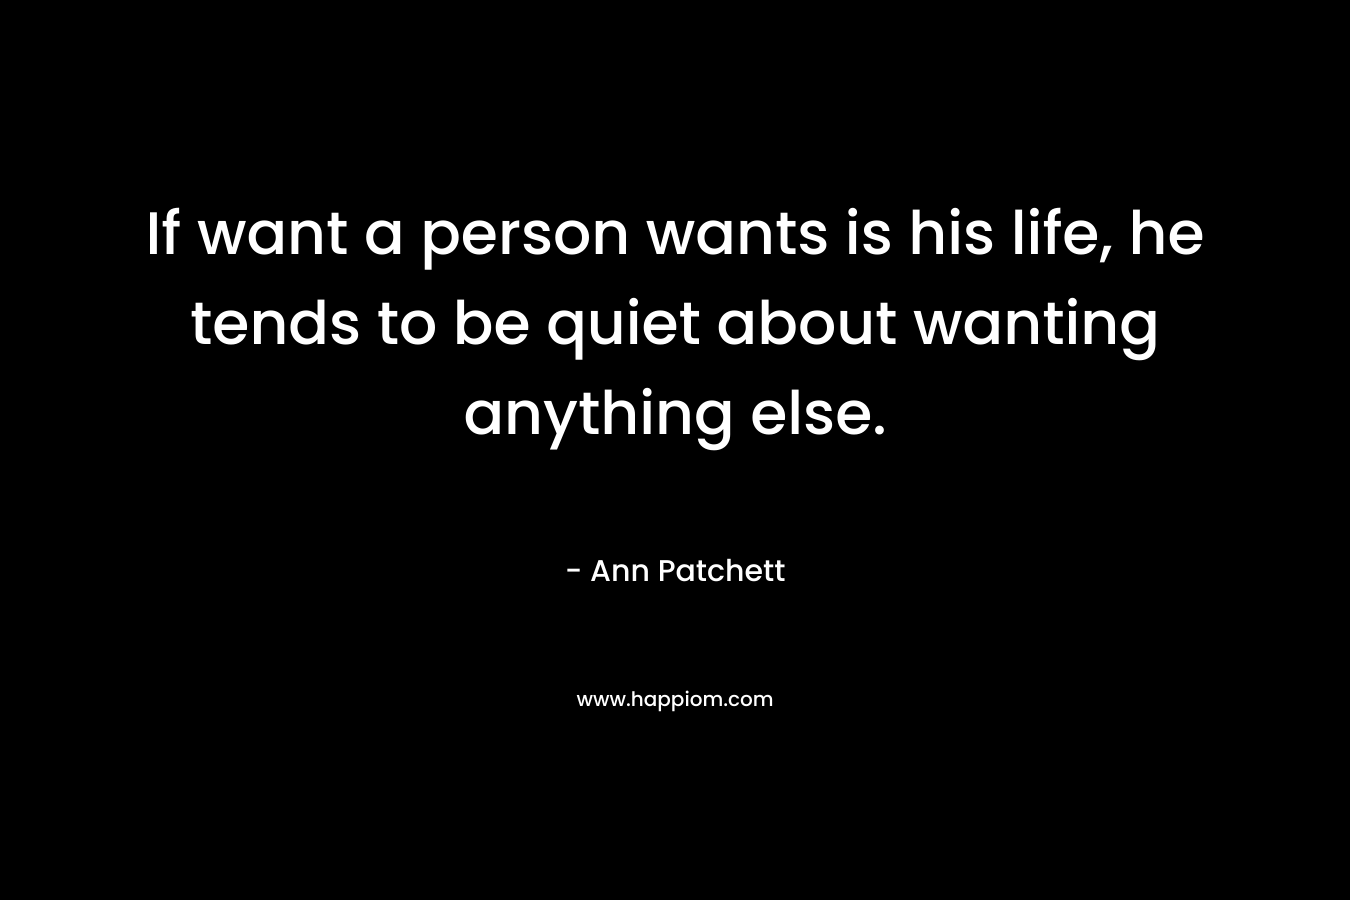 If want a person wants is his life, he tends to be quiet about wanting anything else.